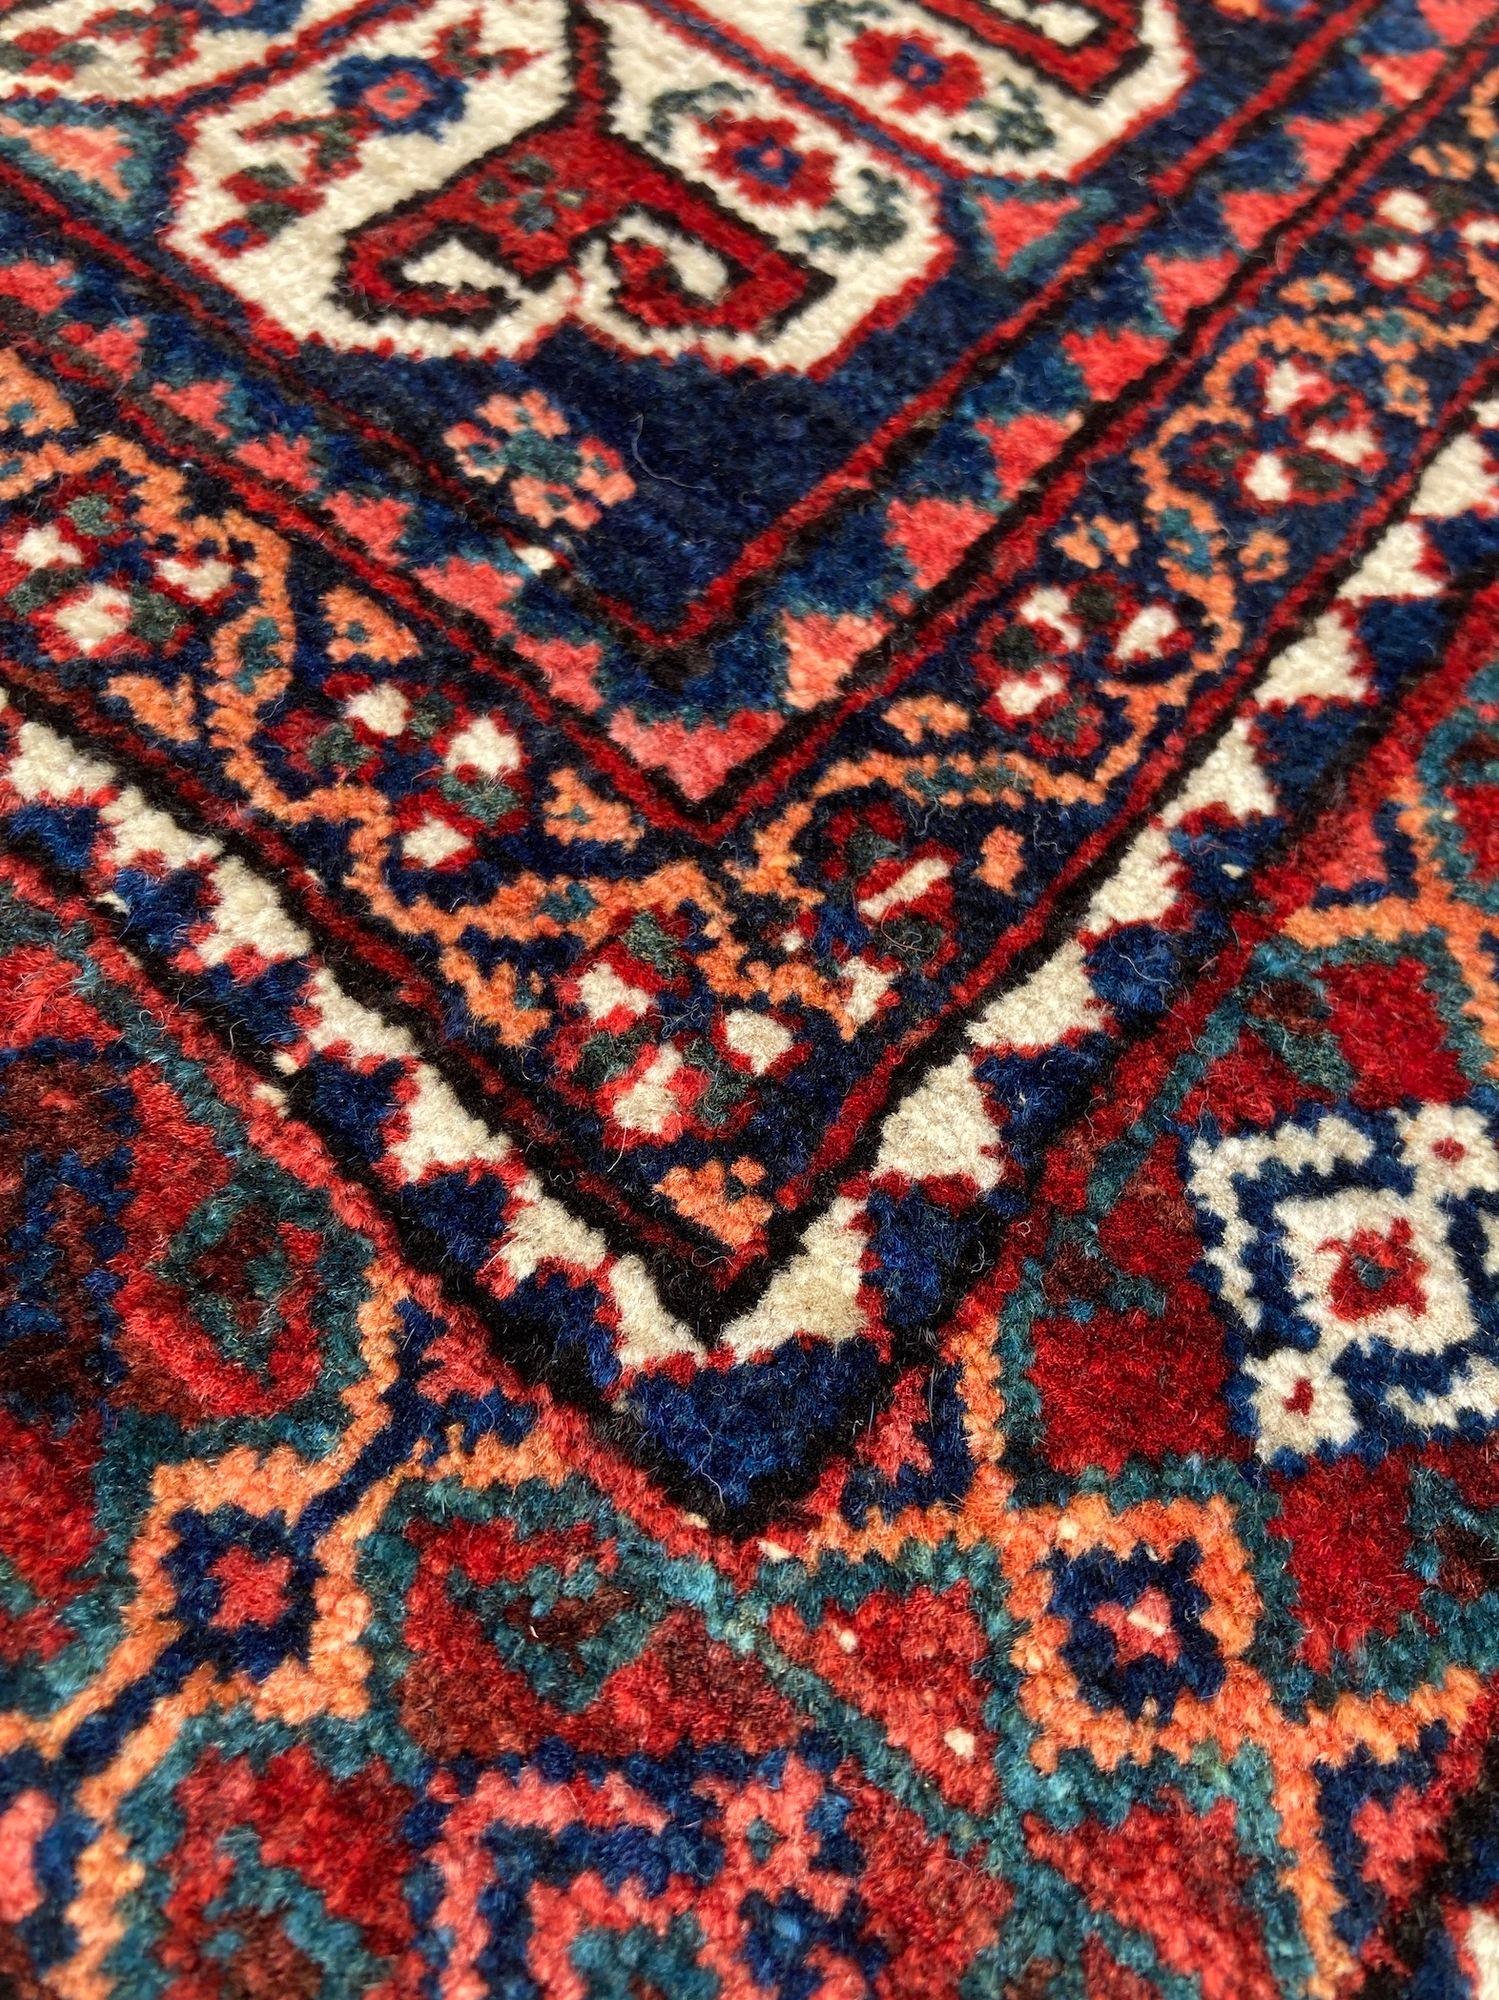 Antique Abadeh Rug 2.05m x 1.43m 5